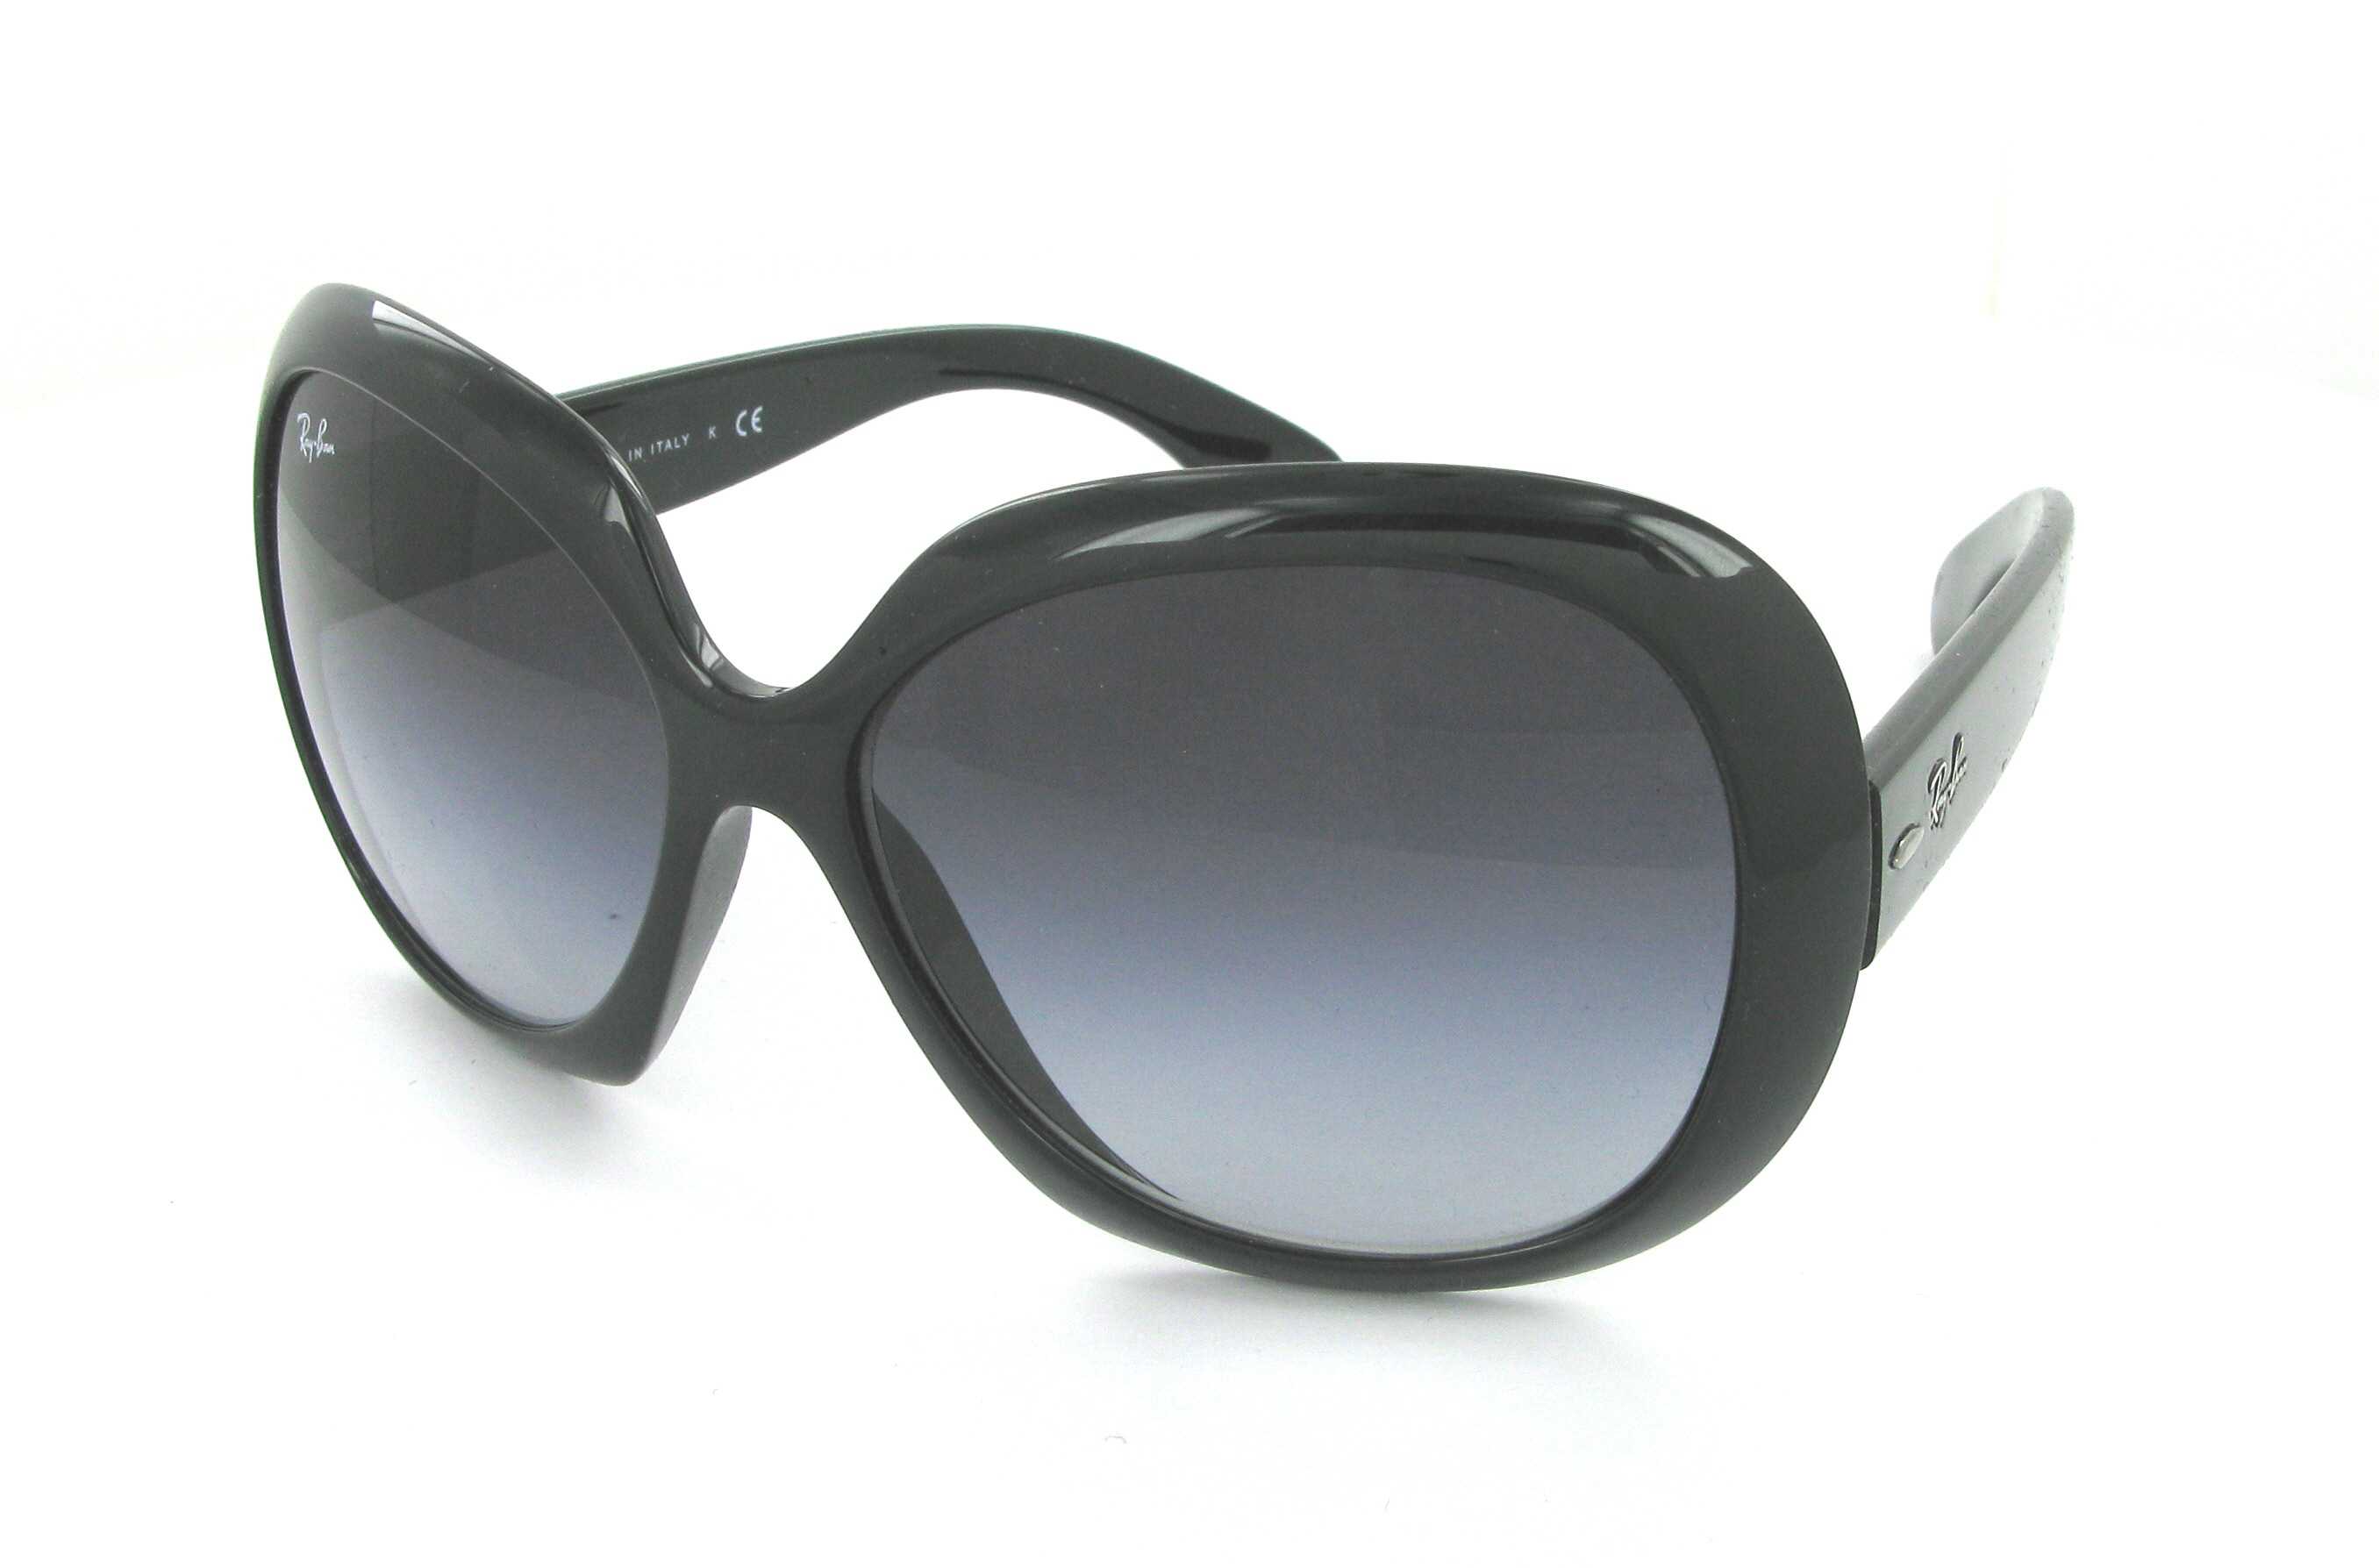 Sunglasses RAY-BAN RB 4098 601/8G JACKIE OHH II 60/14 Woman noire Round  Full Frame Glasses trendy 60mmx14mm 128$CA